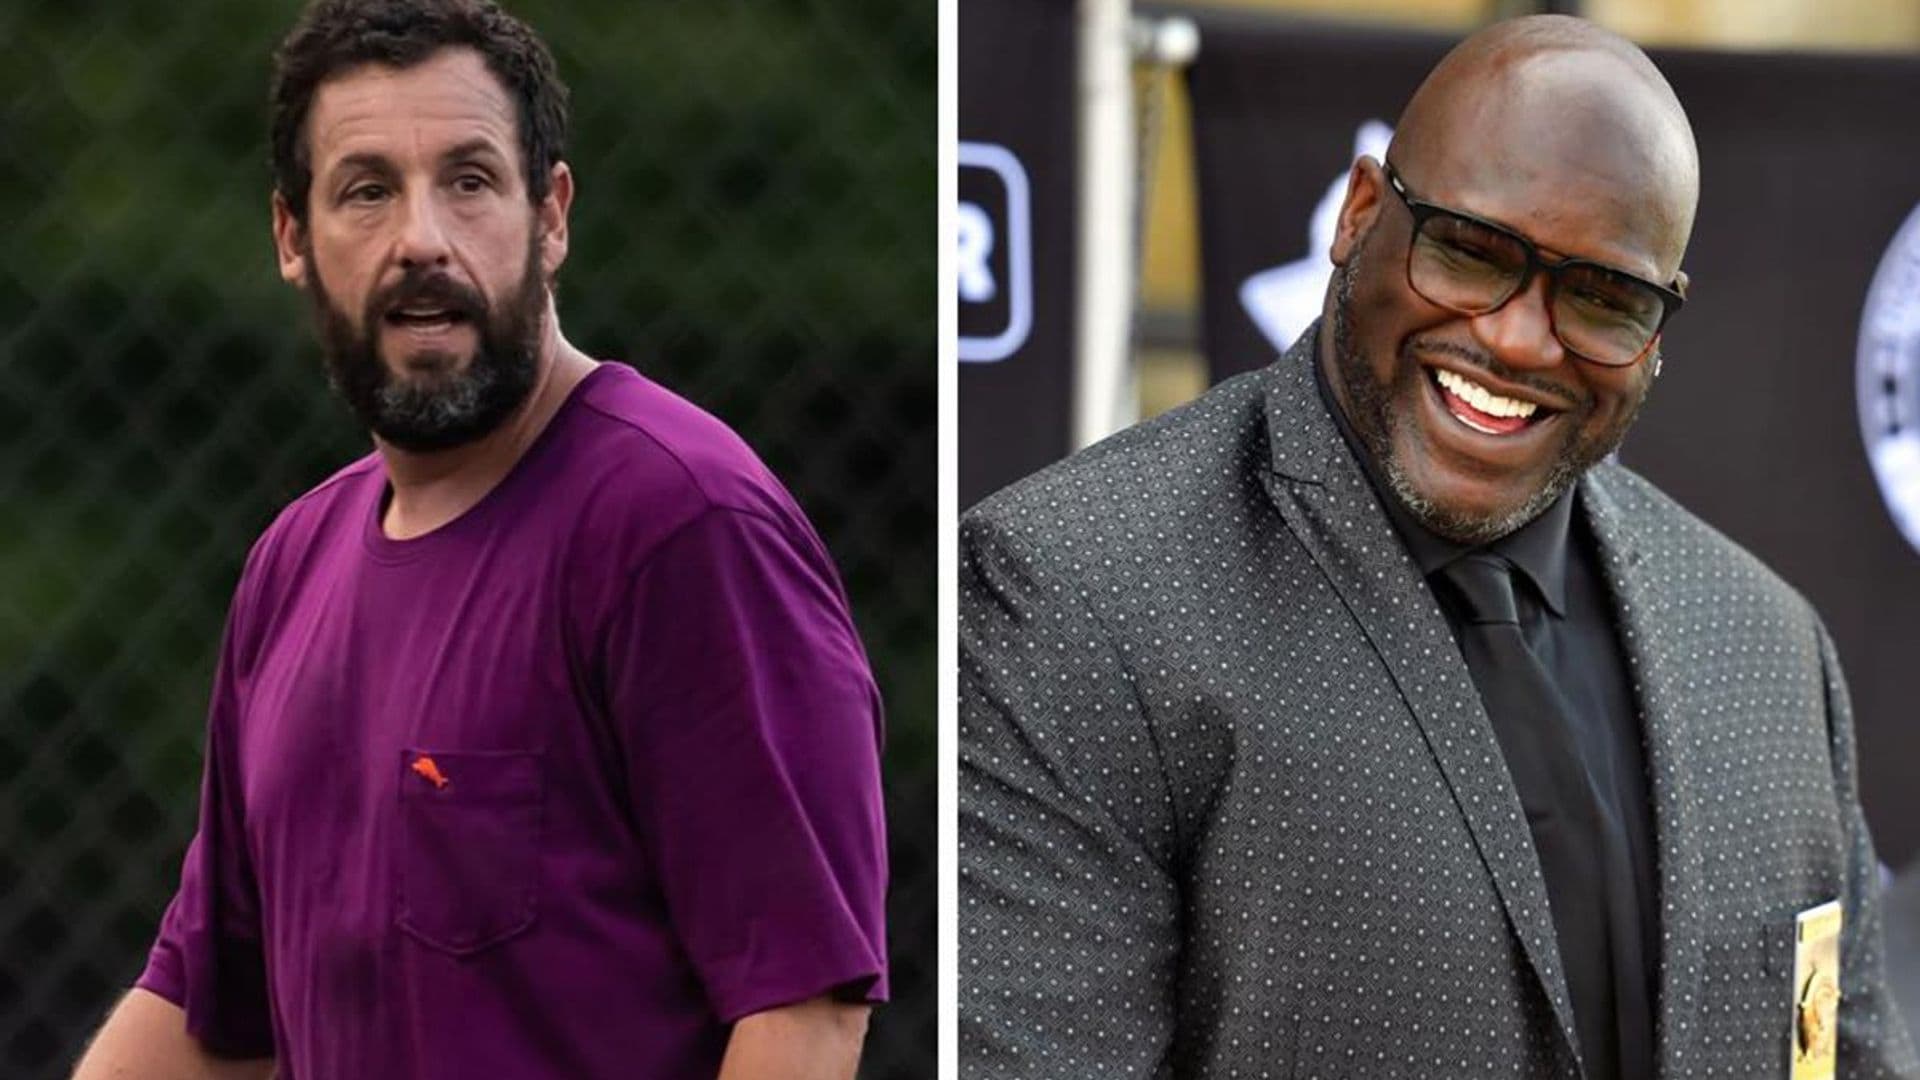 Adam Sandler crashes a pro basketball open gym and Shaquille O’Neal rates his skills